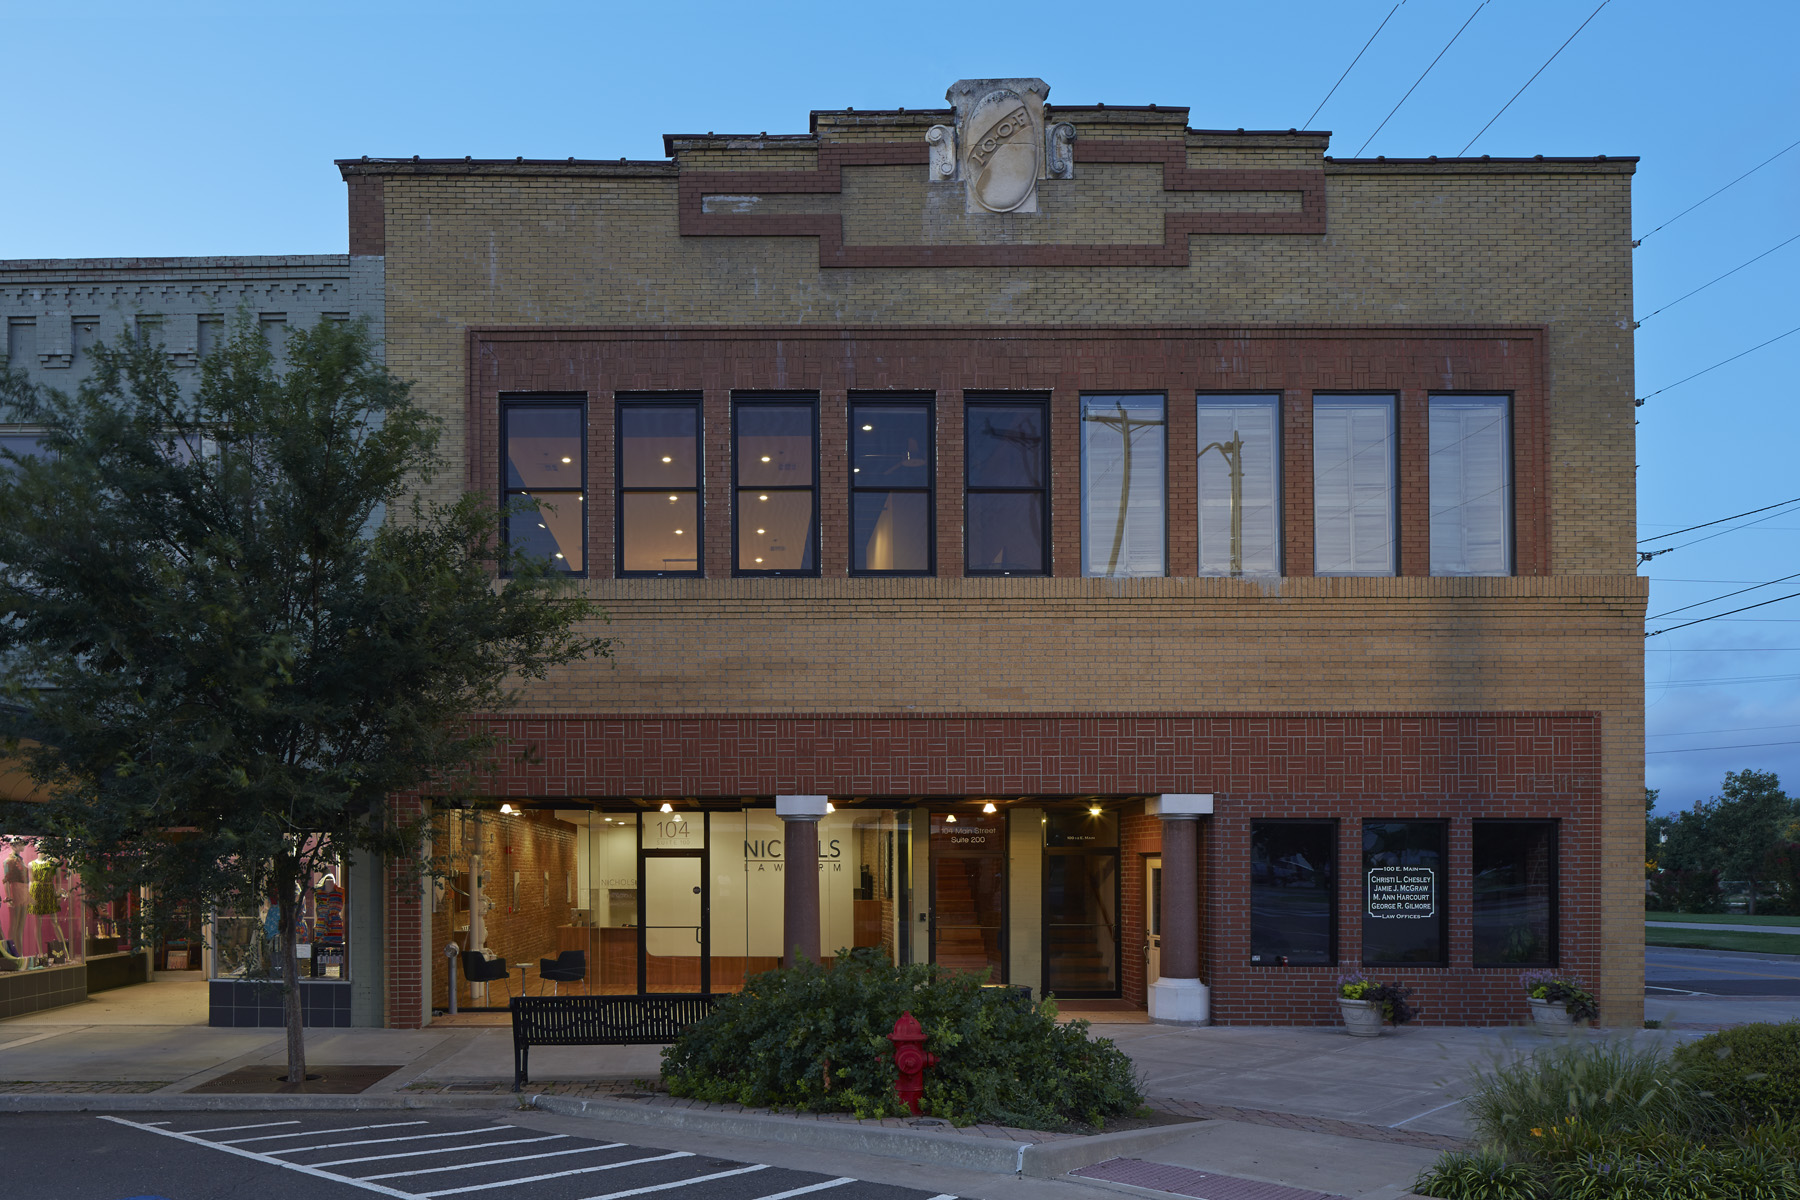 Historical building restored and turned into a modern law office. Renovation by Brent Swift + SwiftCo in Norman, Oklahoma. Purpose is to show our quality of work.